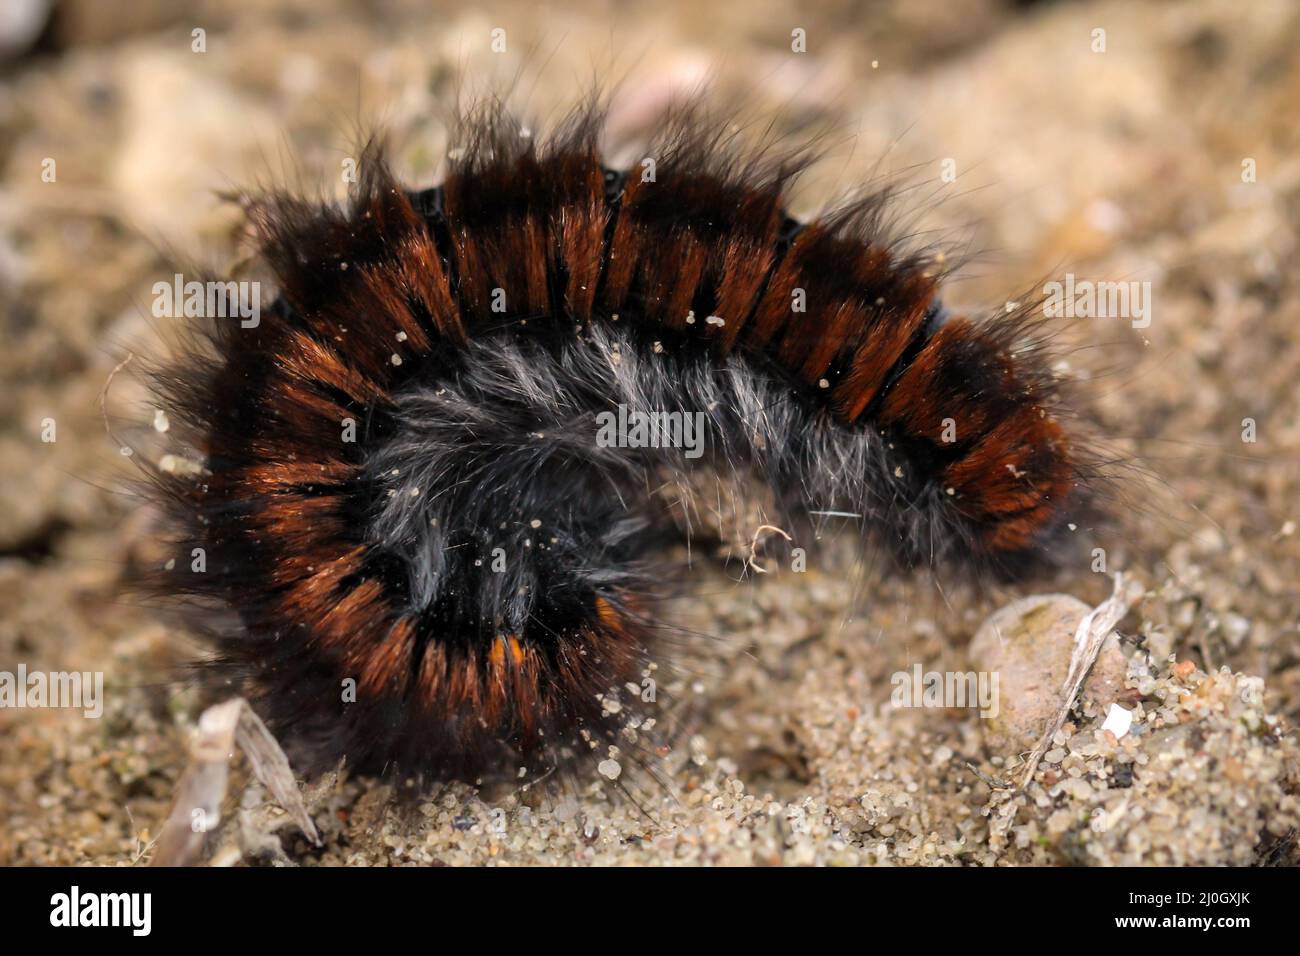 The blackberry moth's hairy caterpillar. When touched, they roll up like a hedgehog. Stock Photo